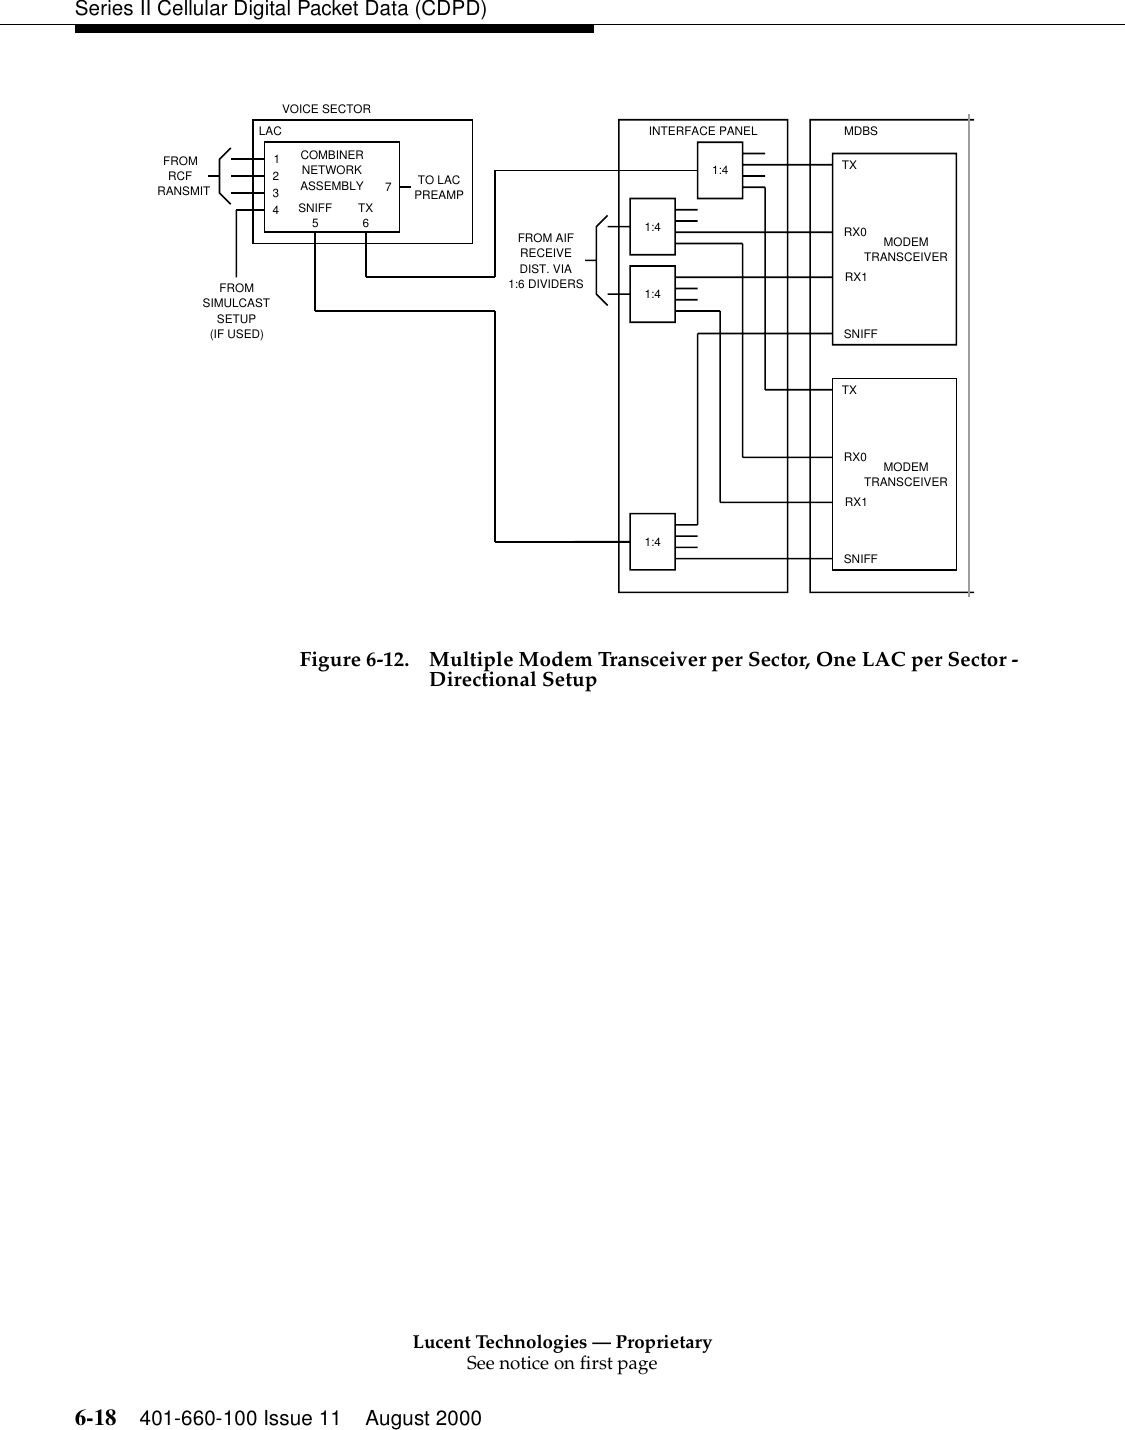 Lucent Technologies — ProprietarySee notice on first page6-18 401-660-100 Issue 11 August 2000Series II Cellular Digital Packet Data (CDPD)Figure 6-12. Multiple Modem Transceiver per Sector, One LAC per Sector -Directional SetupVOICE SECTORLAC12347INTERFACE PANEL MDBSTXRX0RX1SNIFFFROMRCFRANSMITCOMBINERNETWORKASSEMBLYSNIFF5TX6TO LACPREAMPFROM AIFRECEIVEDIST. VIA1:6 DIVIDERSMODEMTRANSCEIVERTXRX0RX1SNIFFMODEMTRANSCEIVER1:41:41:41:4FROMSIMULCASTSETUP(IF USED)